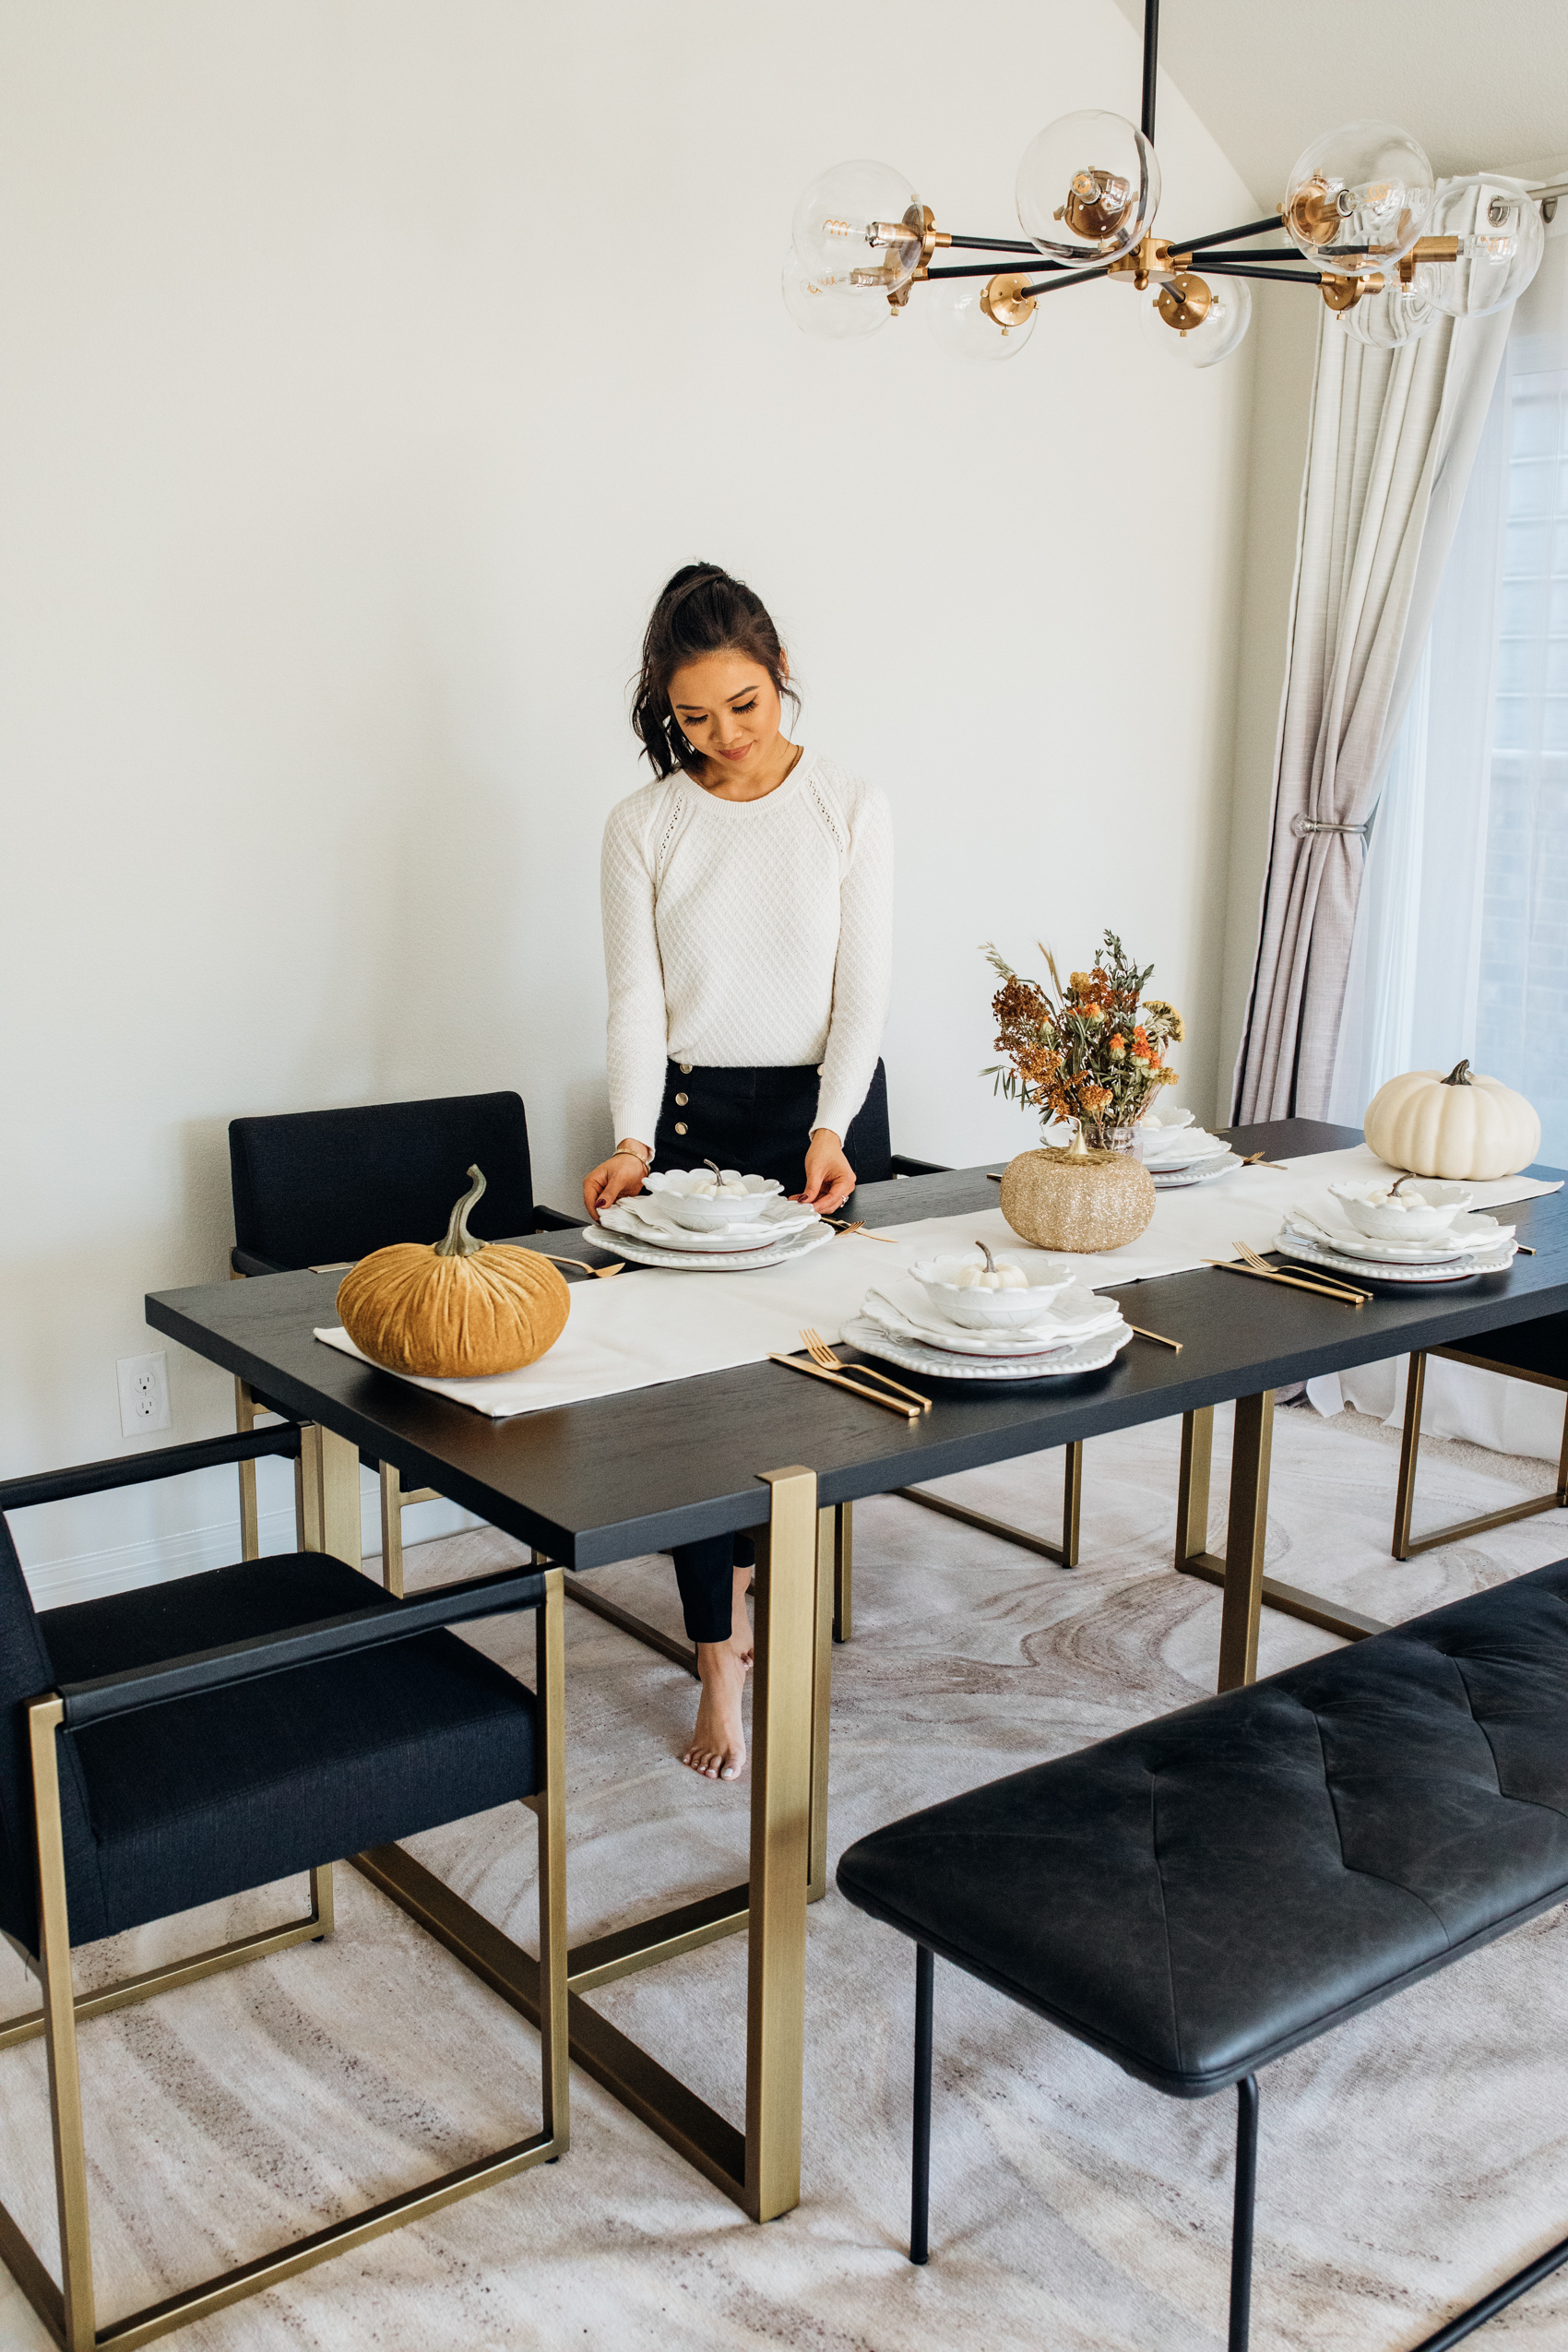 Article Oscuro dining table with gold legs in a modern dining room for Thanksgiving